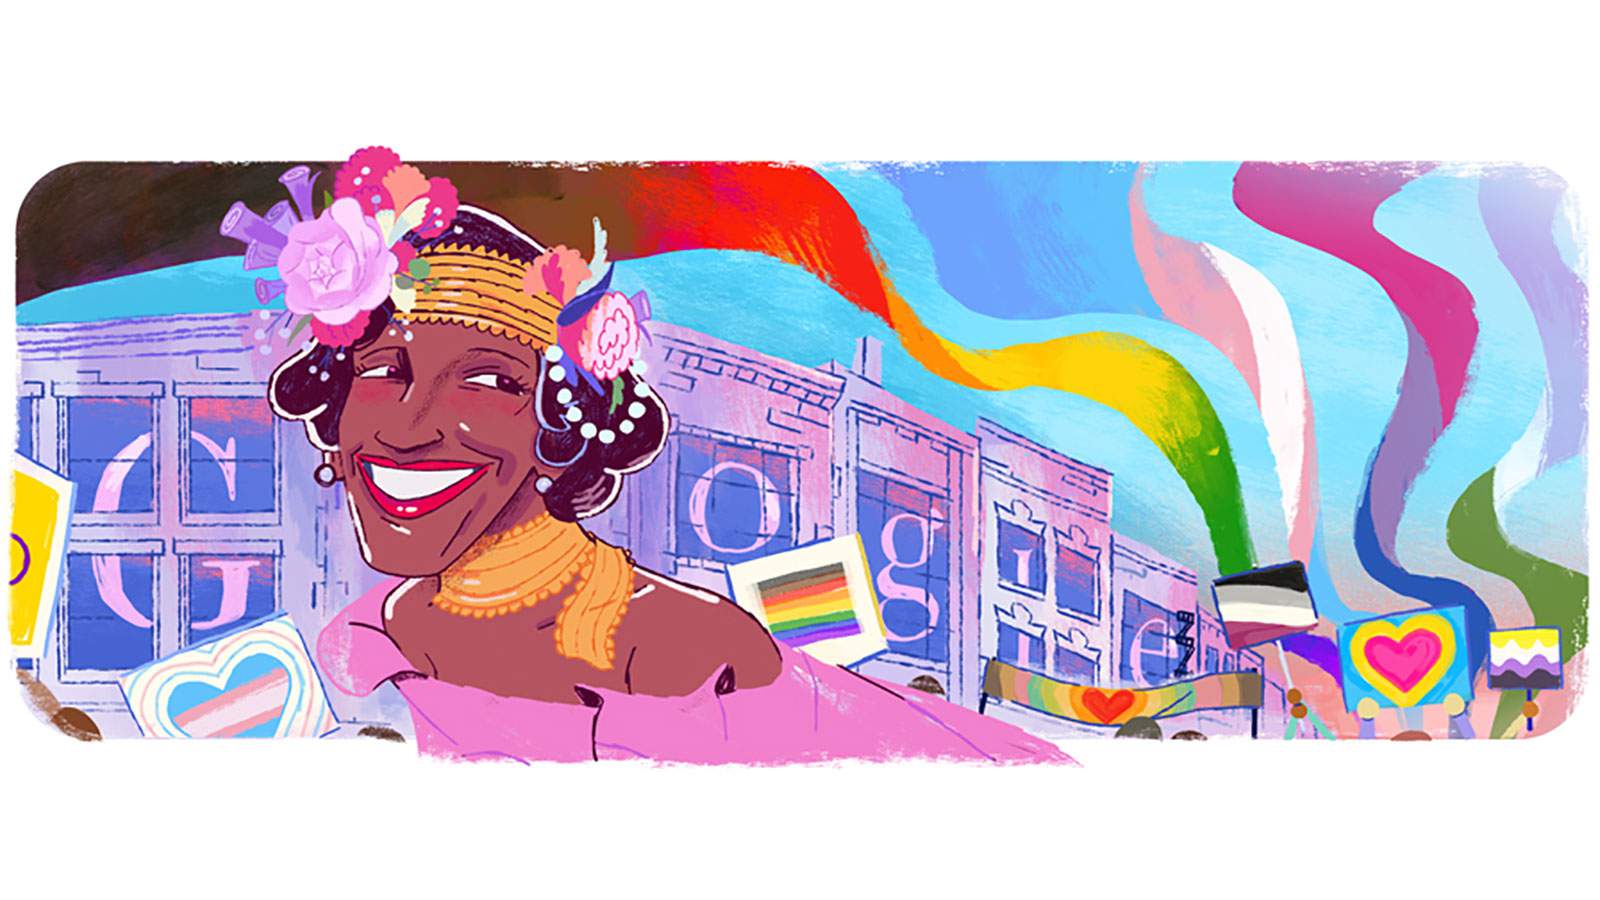 Google Doodle of Marsha P. Johnson, beloved trans-rights activist, will close out Pride month